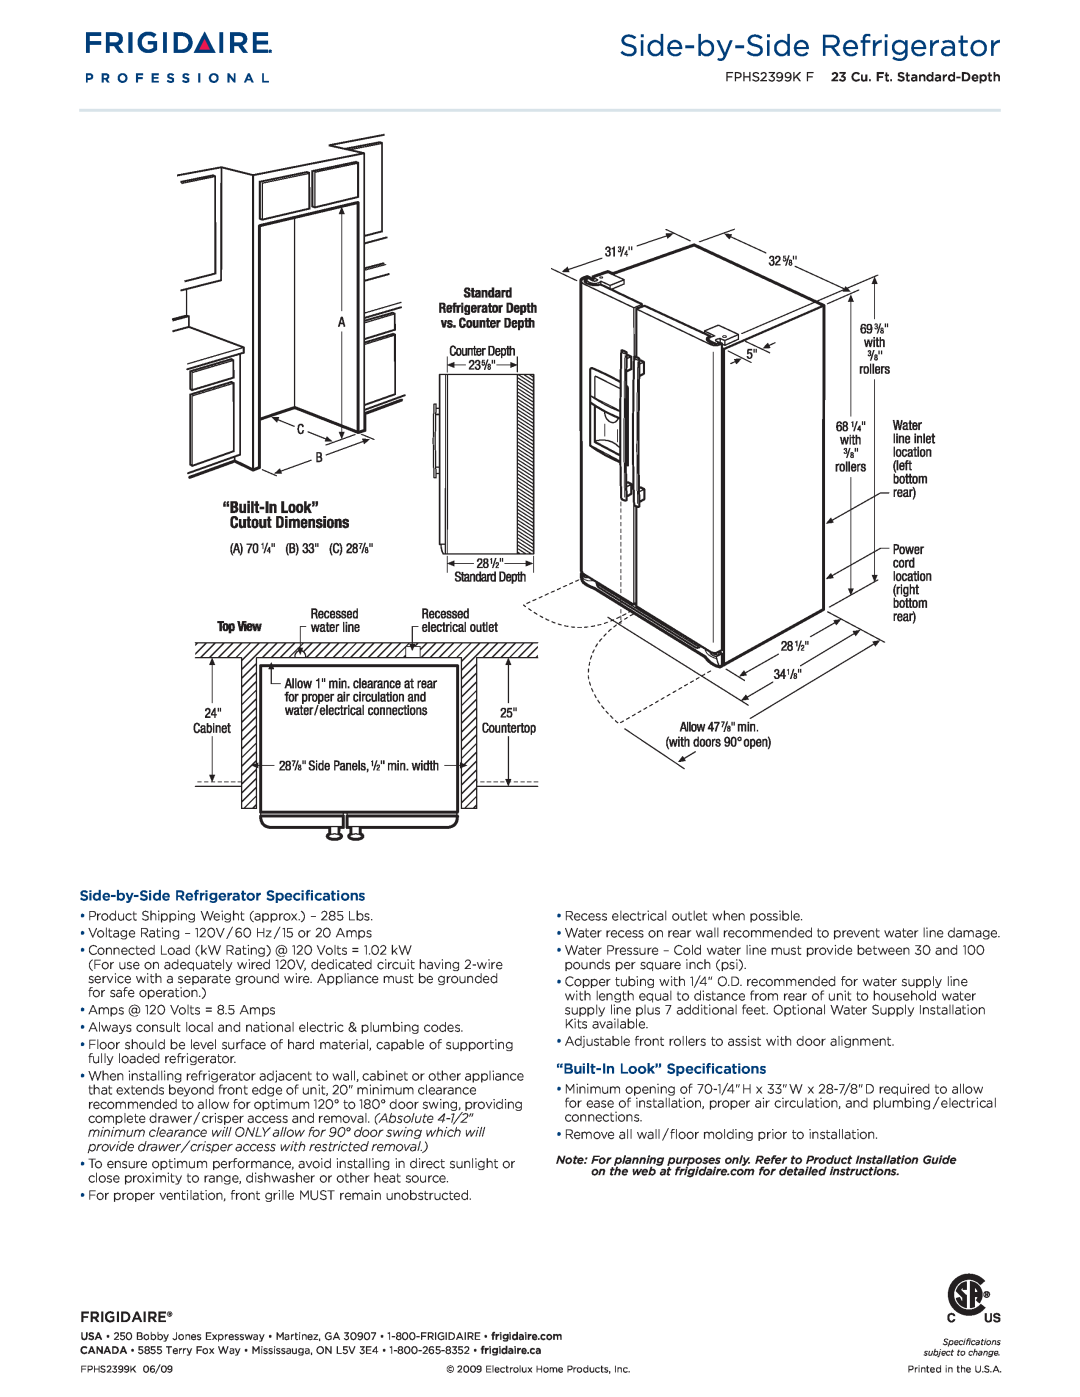 Frigidaire FPHS2399KF dimensions Side-by-SideRefrigerator Specifications, “Built-InLook” Specifications, Frigidaire 